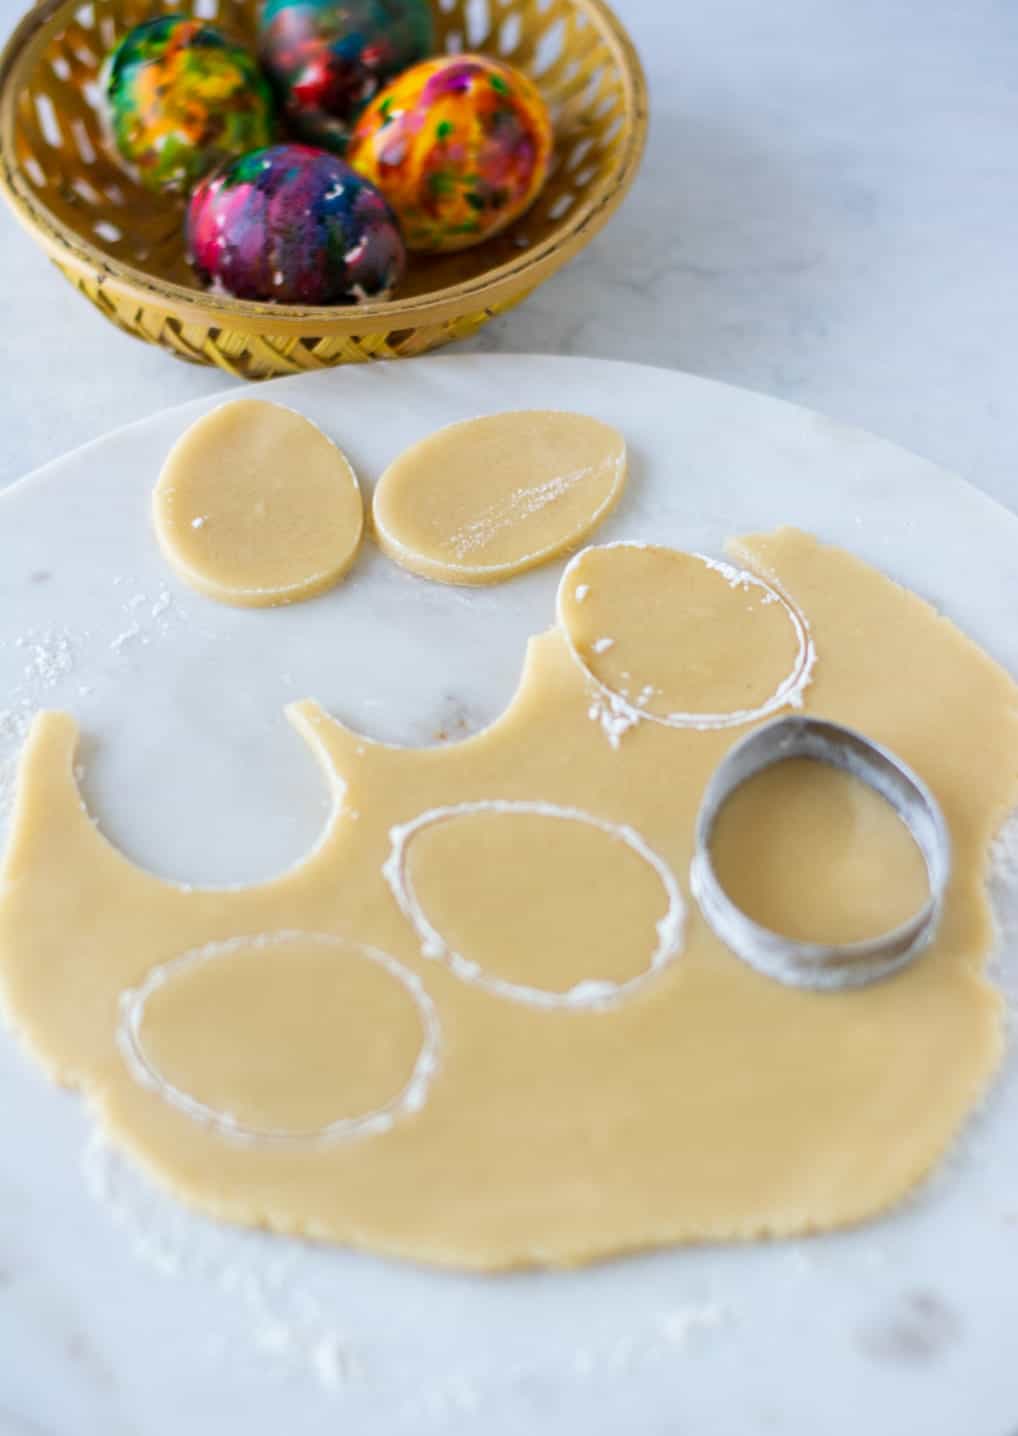 Sugar cookie dough that has been rolled out and a egg shaped cookie cutter.